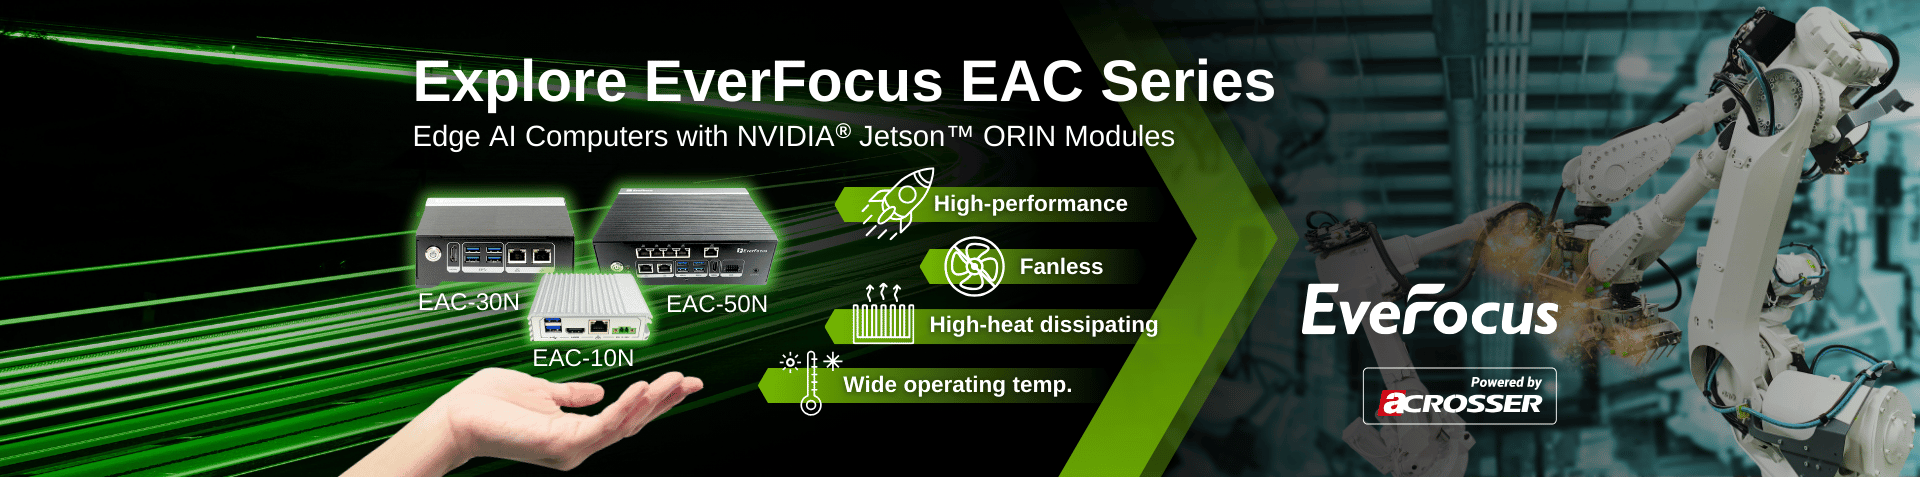 Discover the EverFocus EAC Series: Edge AI Computers Powered by NVIDIA® Jetson™ ORIN Modules